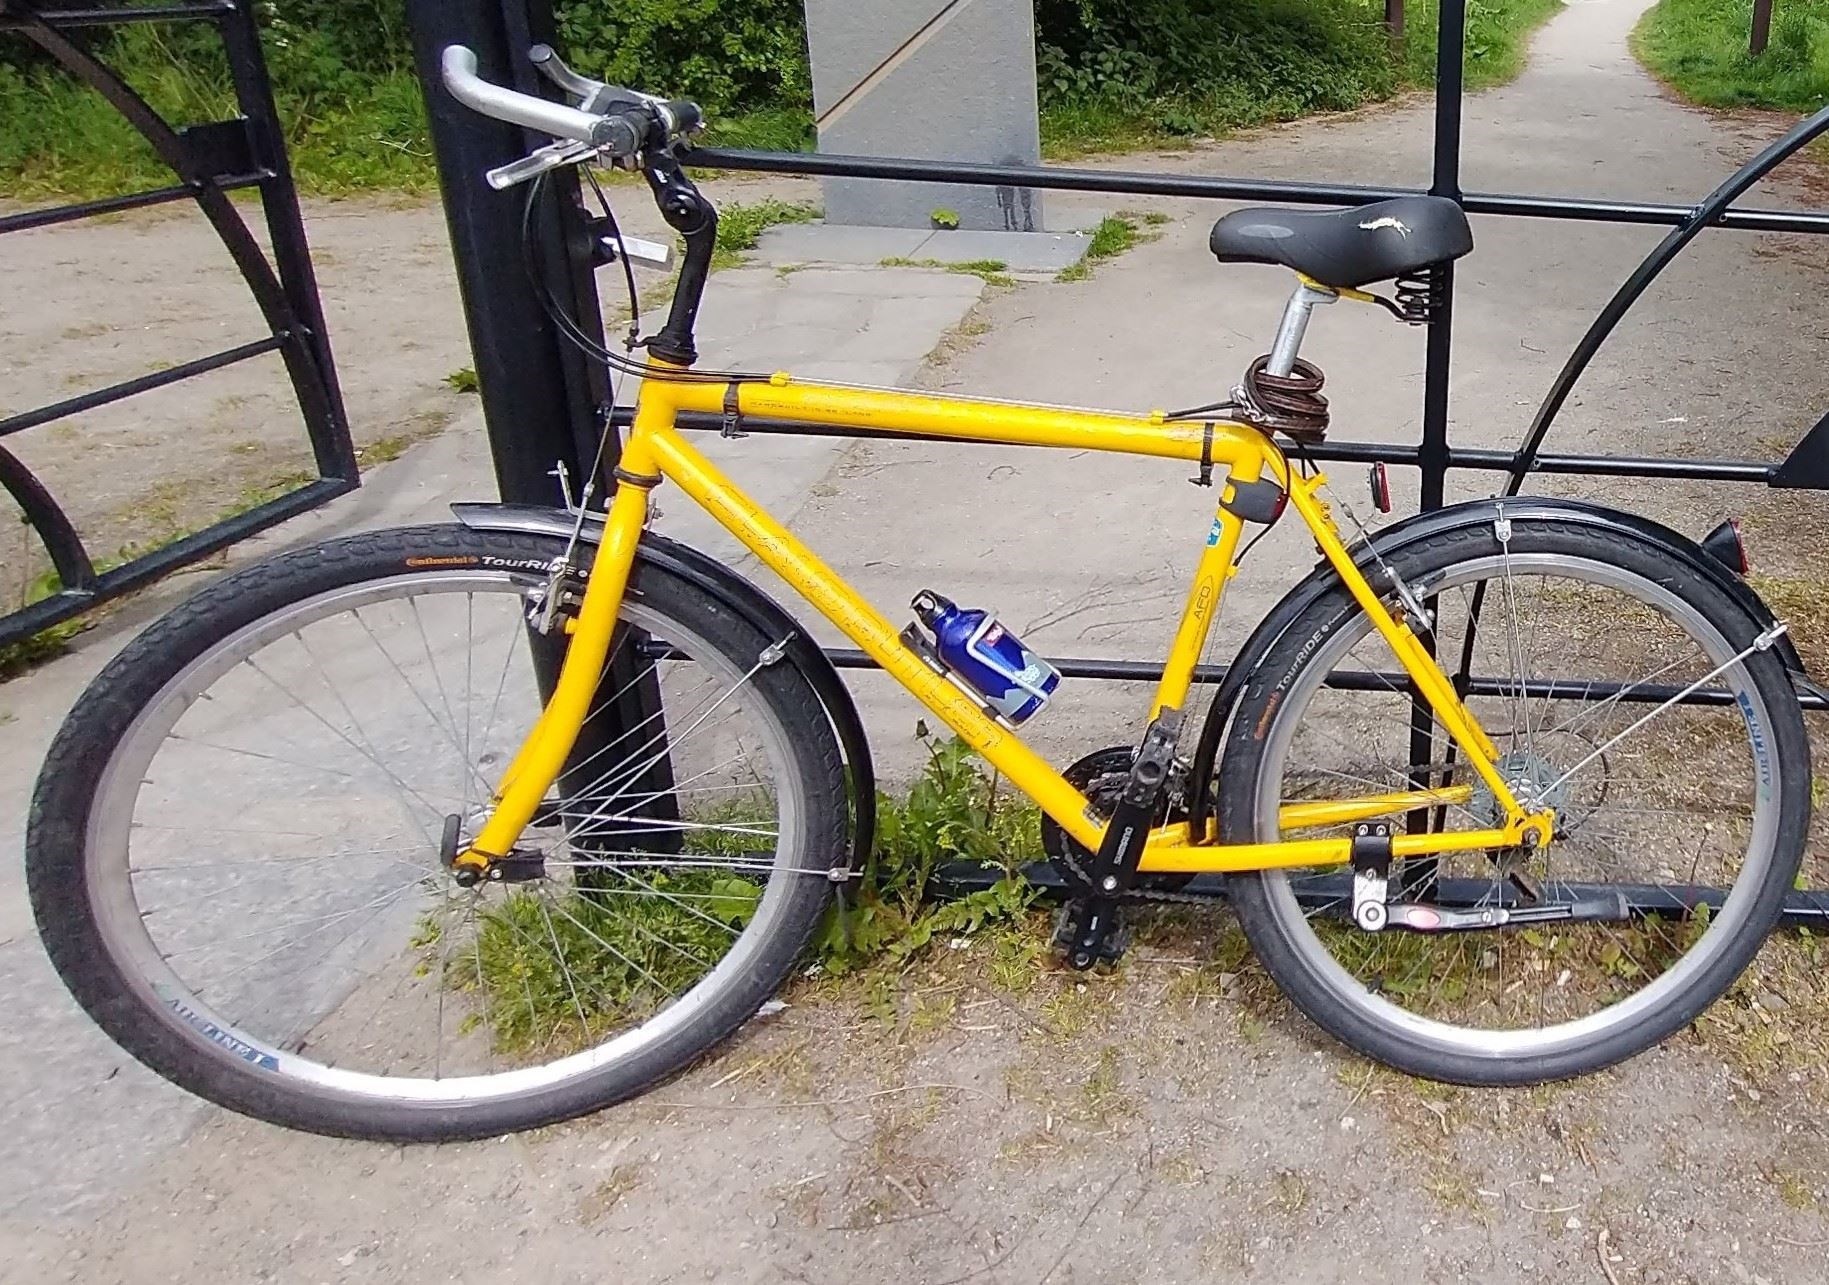 The app could help trace bikes like this one, stolen in Inverness earlier this tyear.